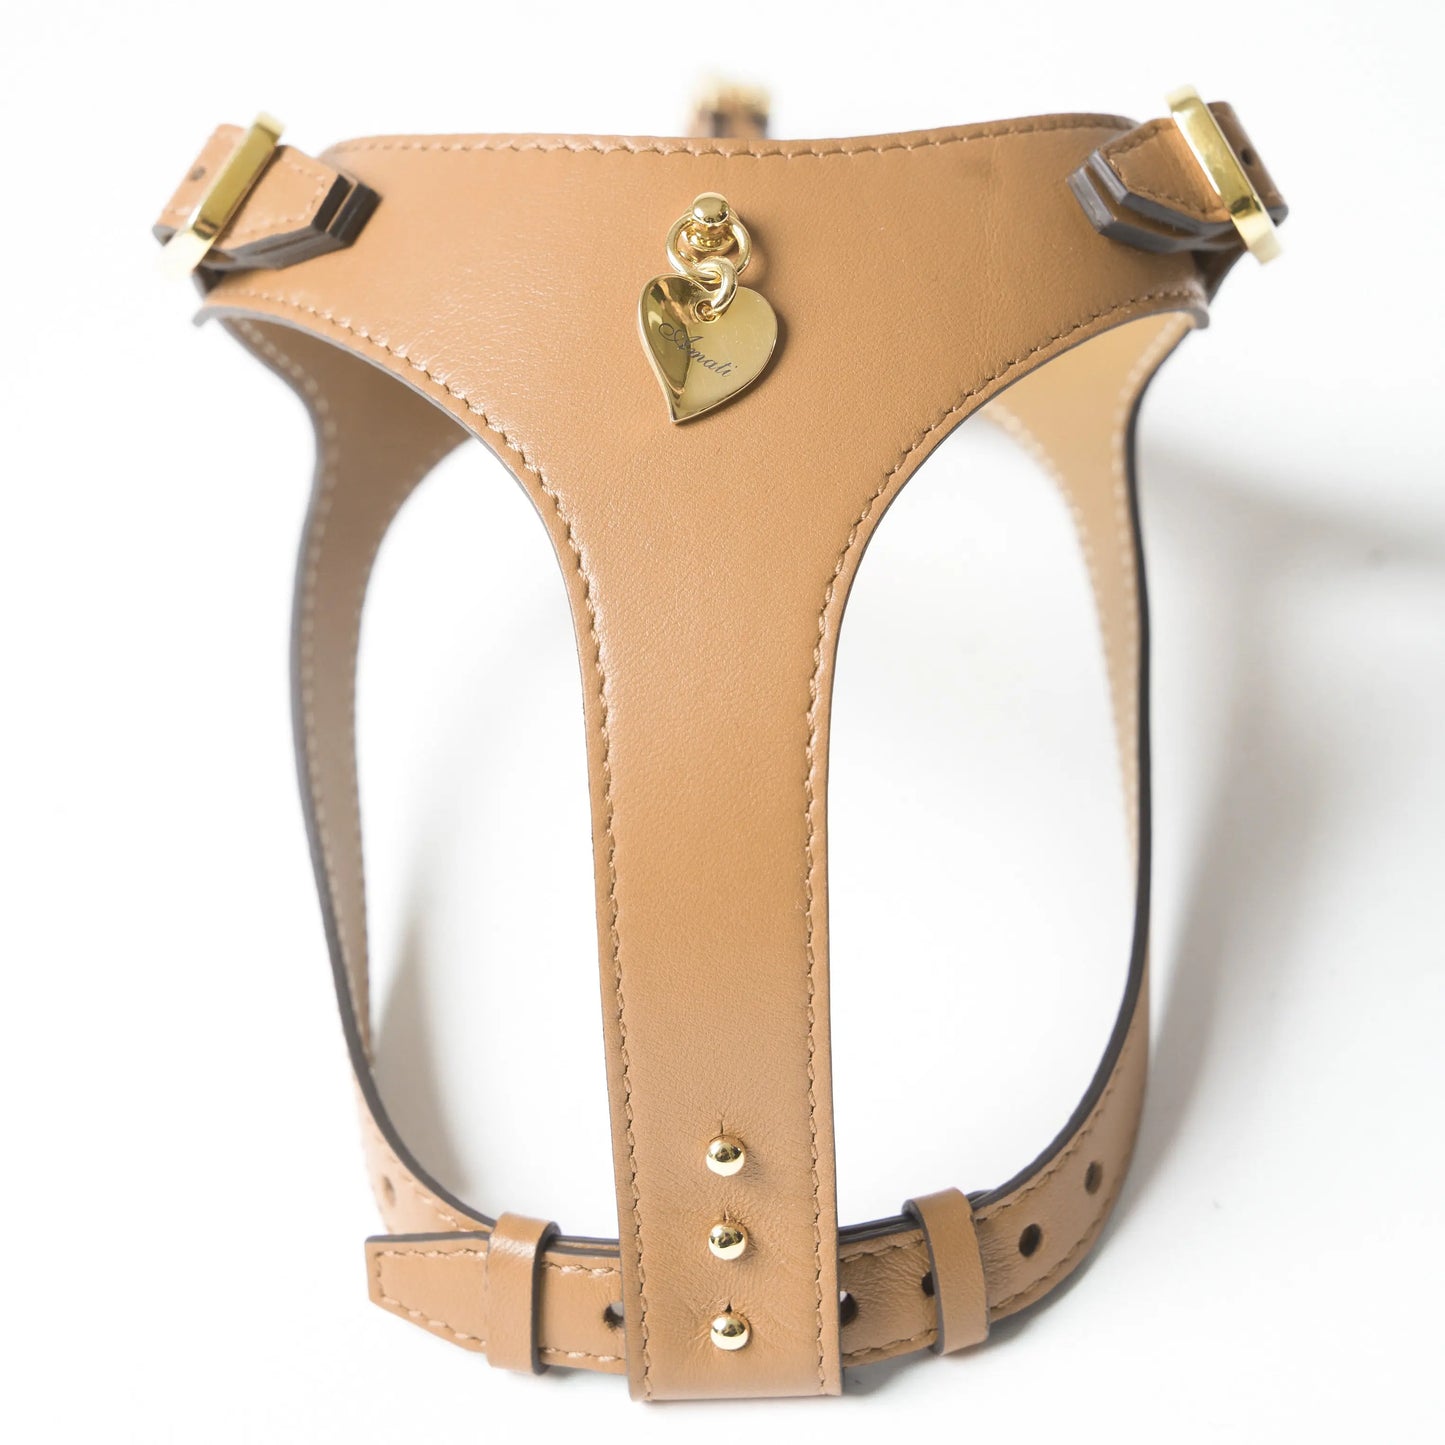 Plain Dog Harness Cappuccino Beige - Fluffy Collective